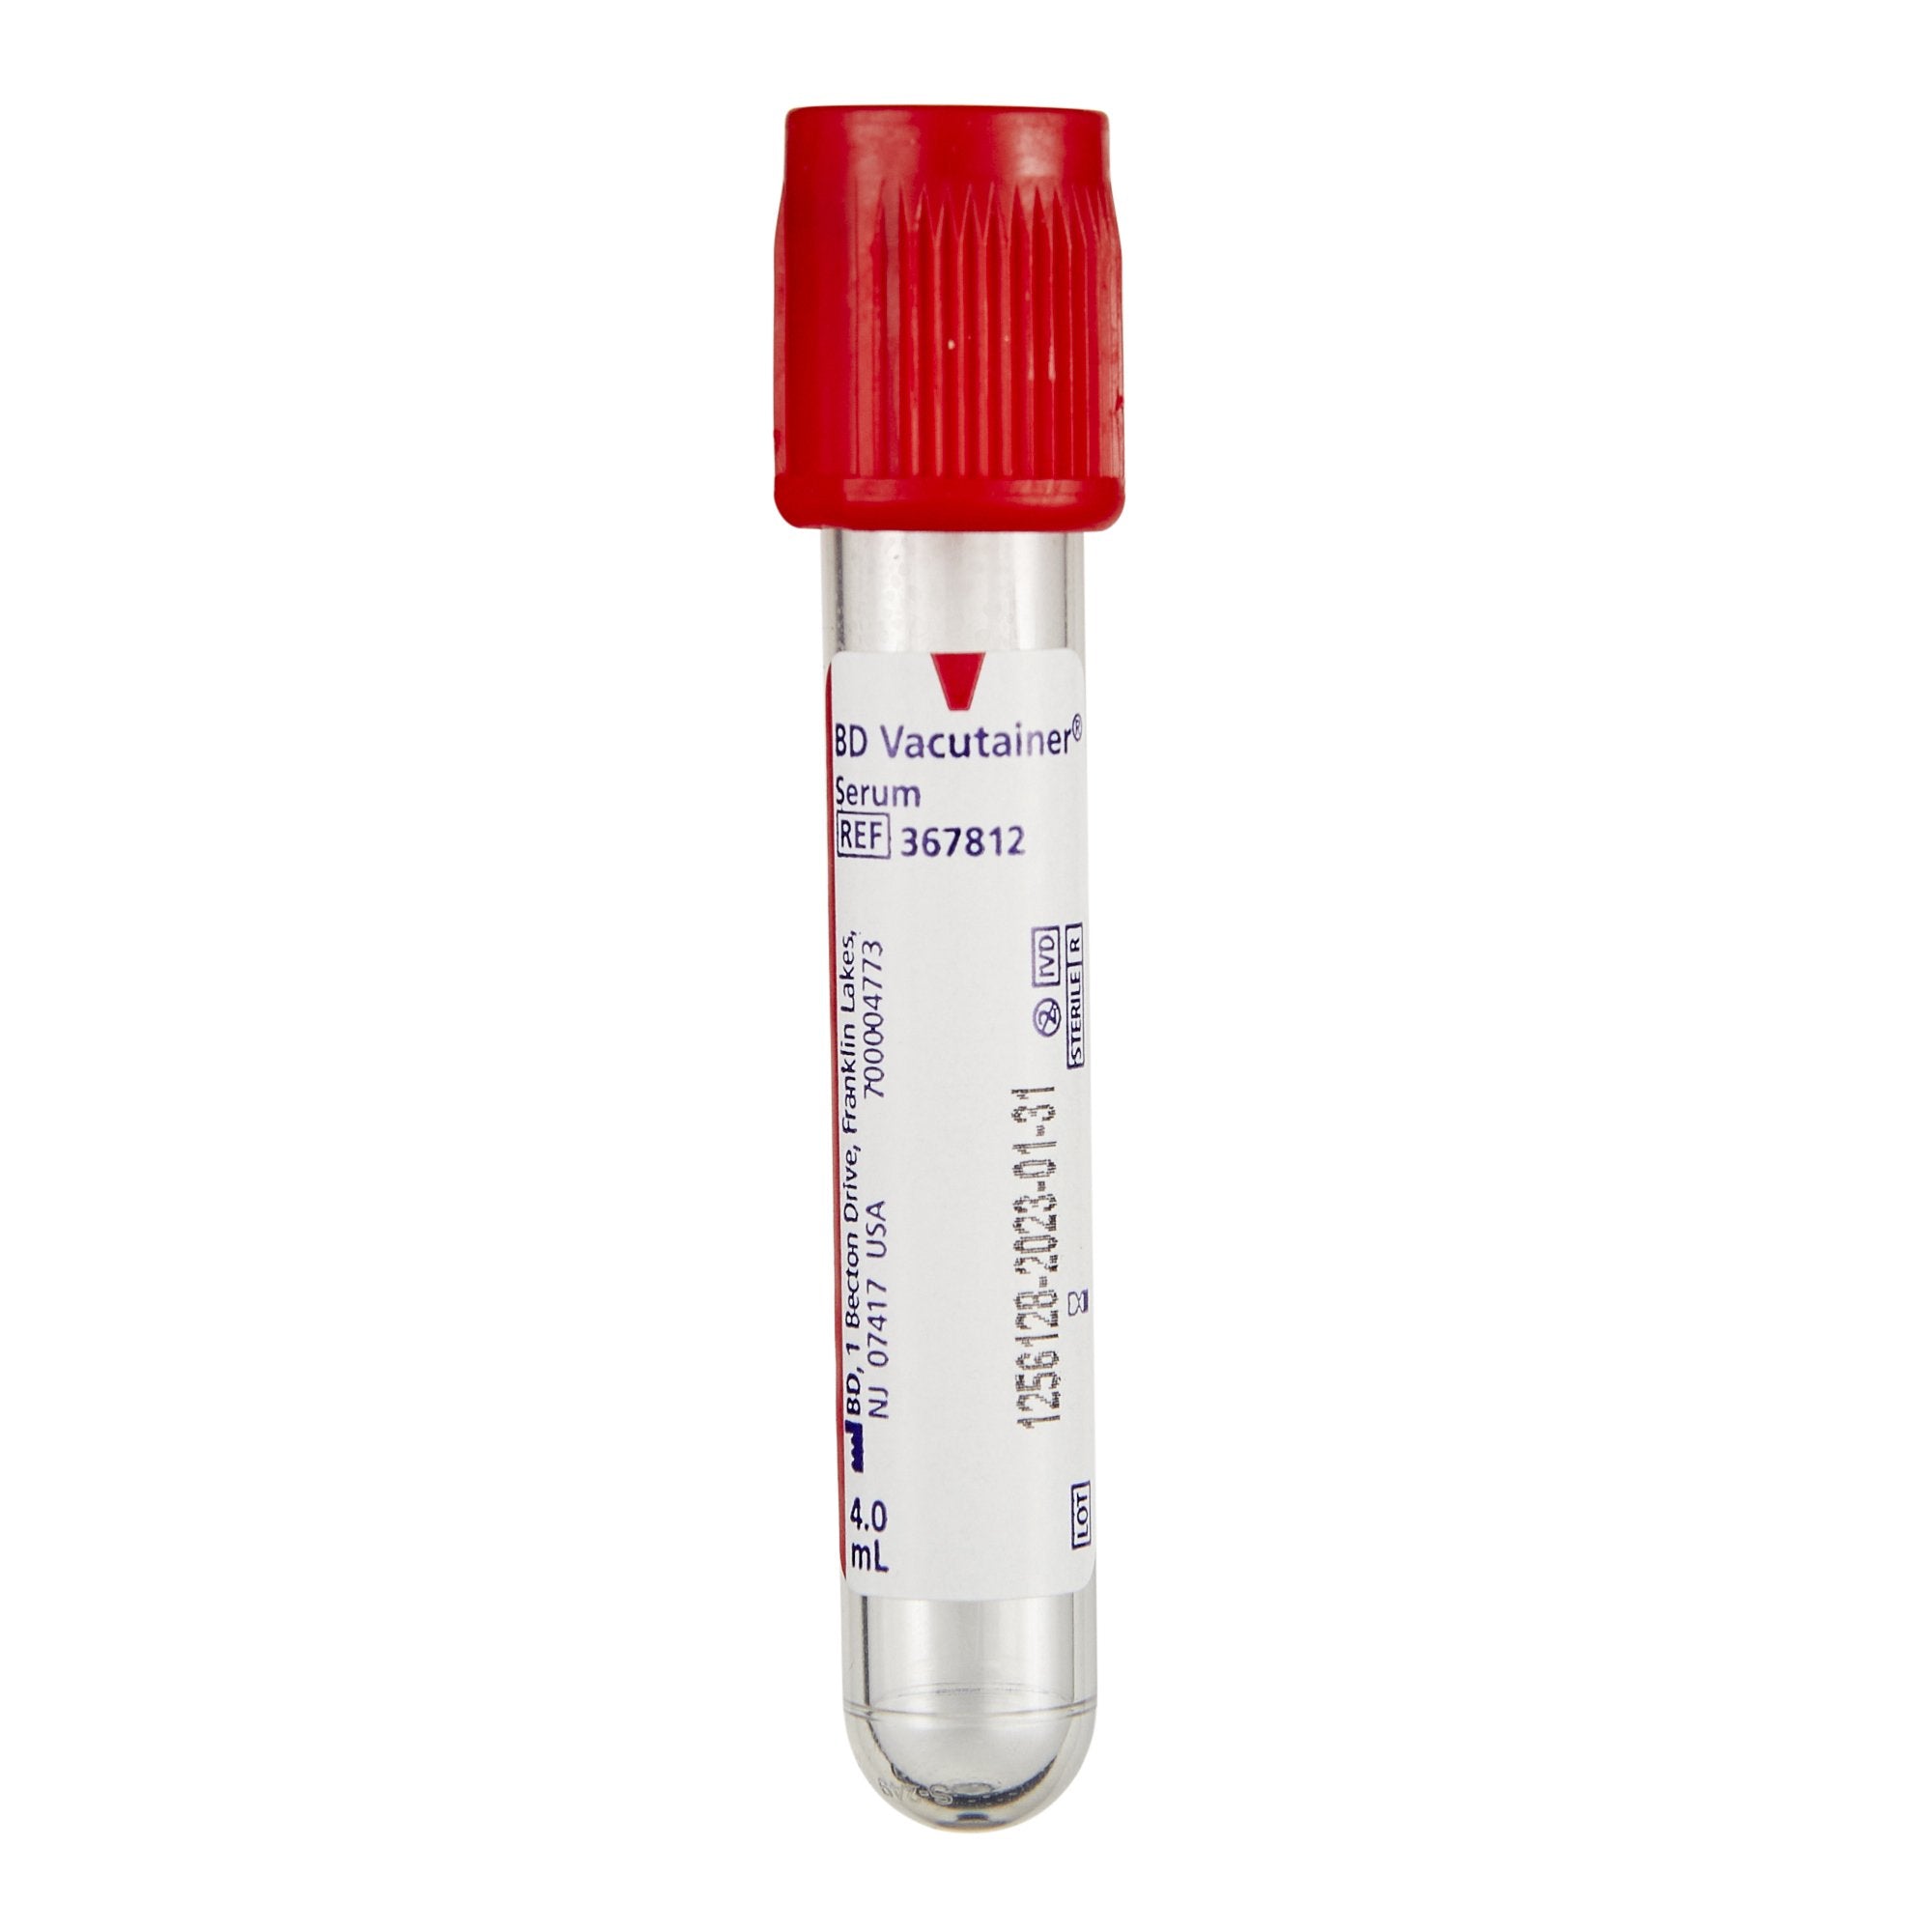 BD Vacutainer 367812 Serum Blood Collection Tubes - 13x75mm, 4mL - 100 tubes per box